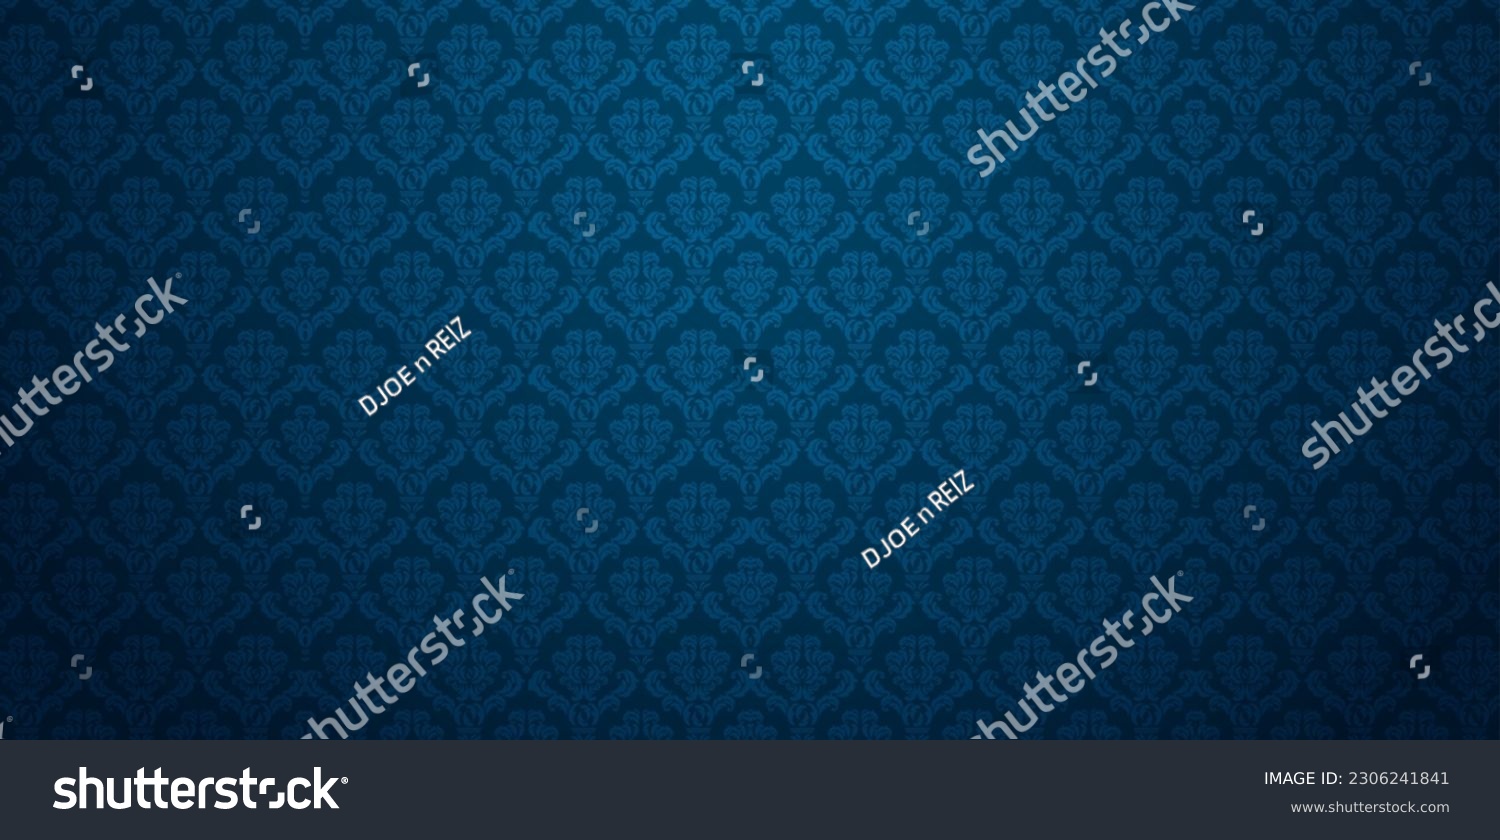 vector illustration seamlessly patterns dark blue damask wallpaper for Presentations marketing, decks, Canvas for text-based compositions: ads, book covers, Digital interfaces, print design templates #2306241841